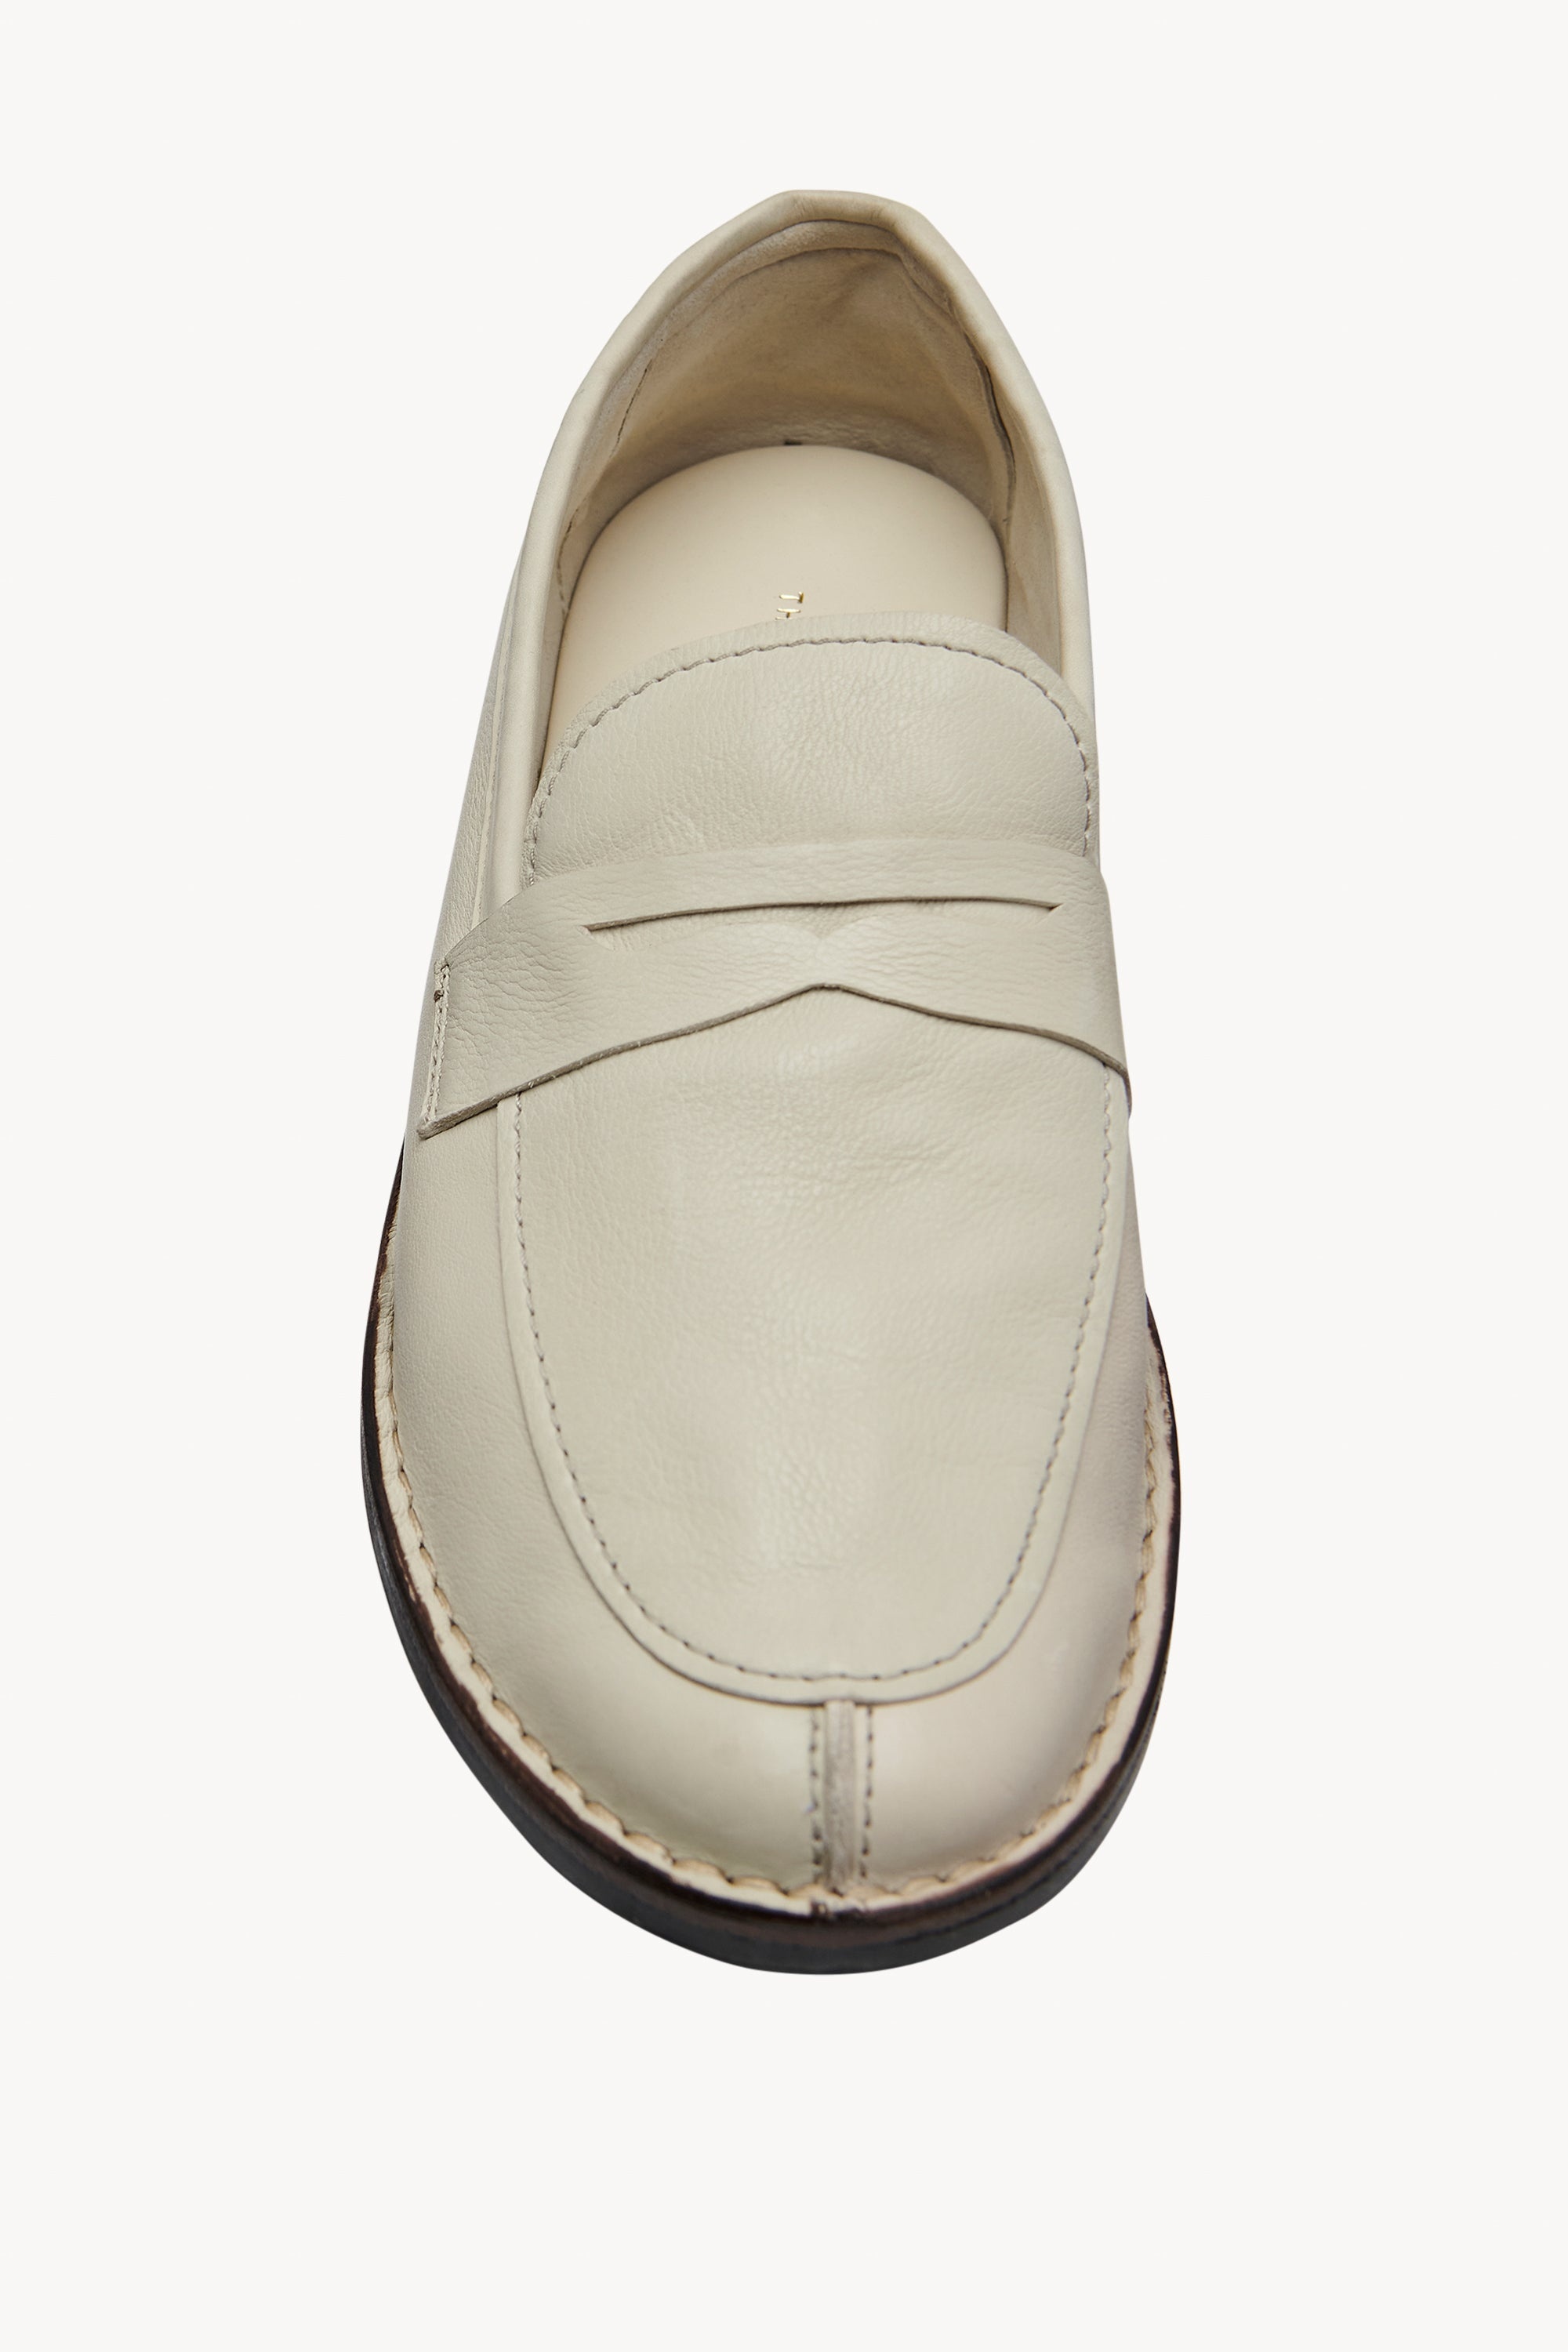 Cary Loafer in Leather - 3